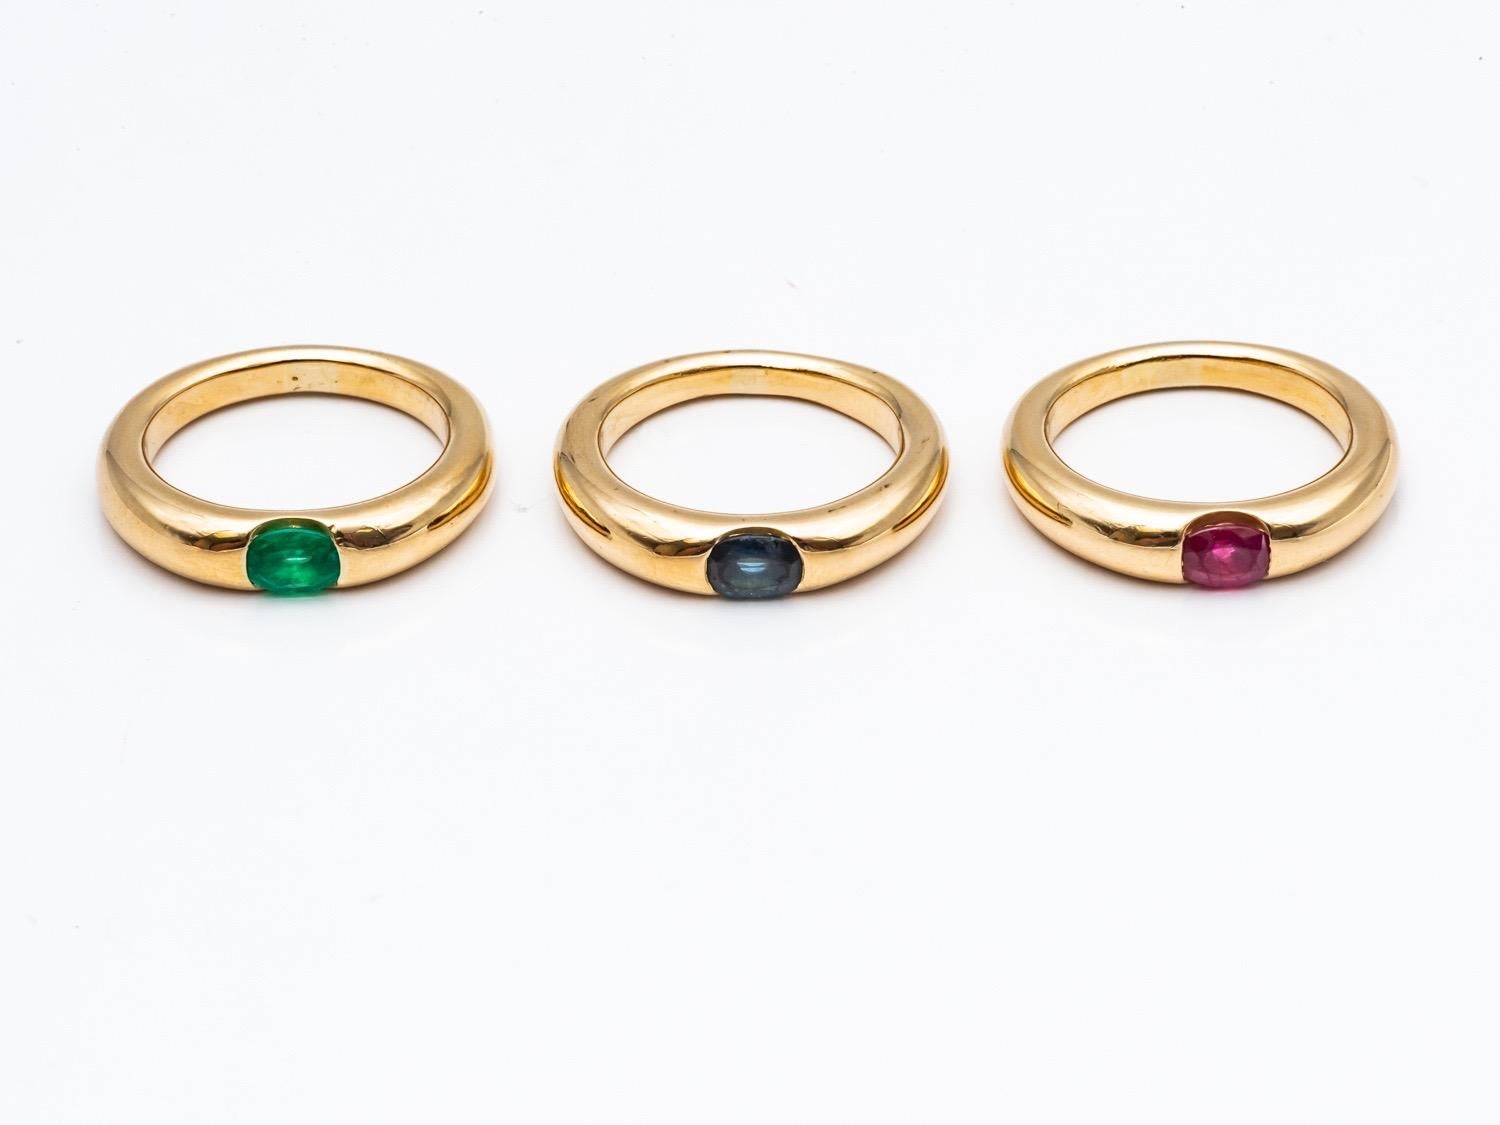 Three 18 Karat Gold Bangles Rings Set with an Emerald, a Sapphire, and a Ruby 3